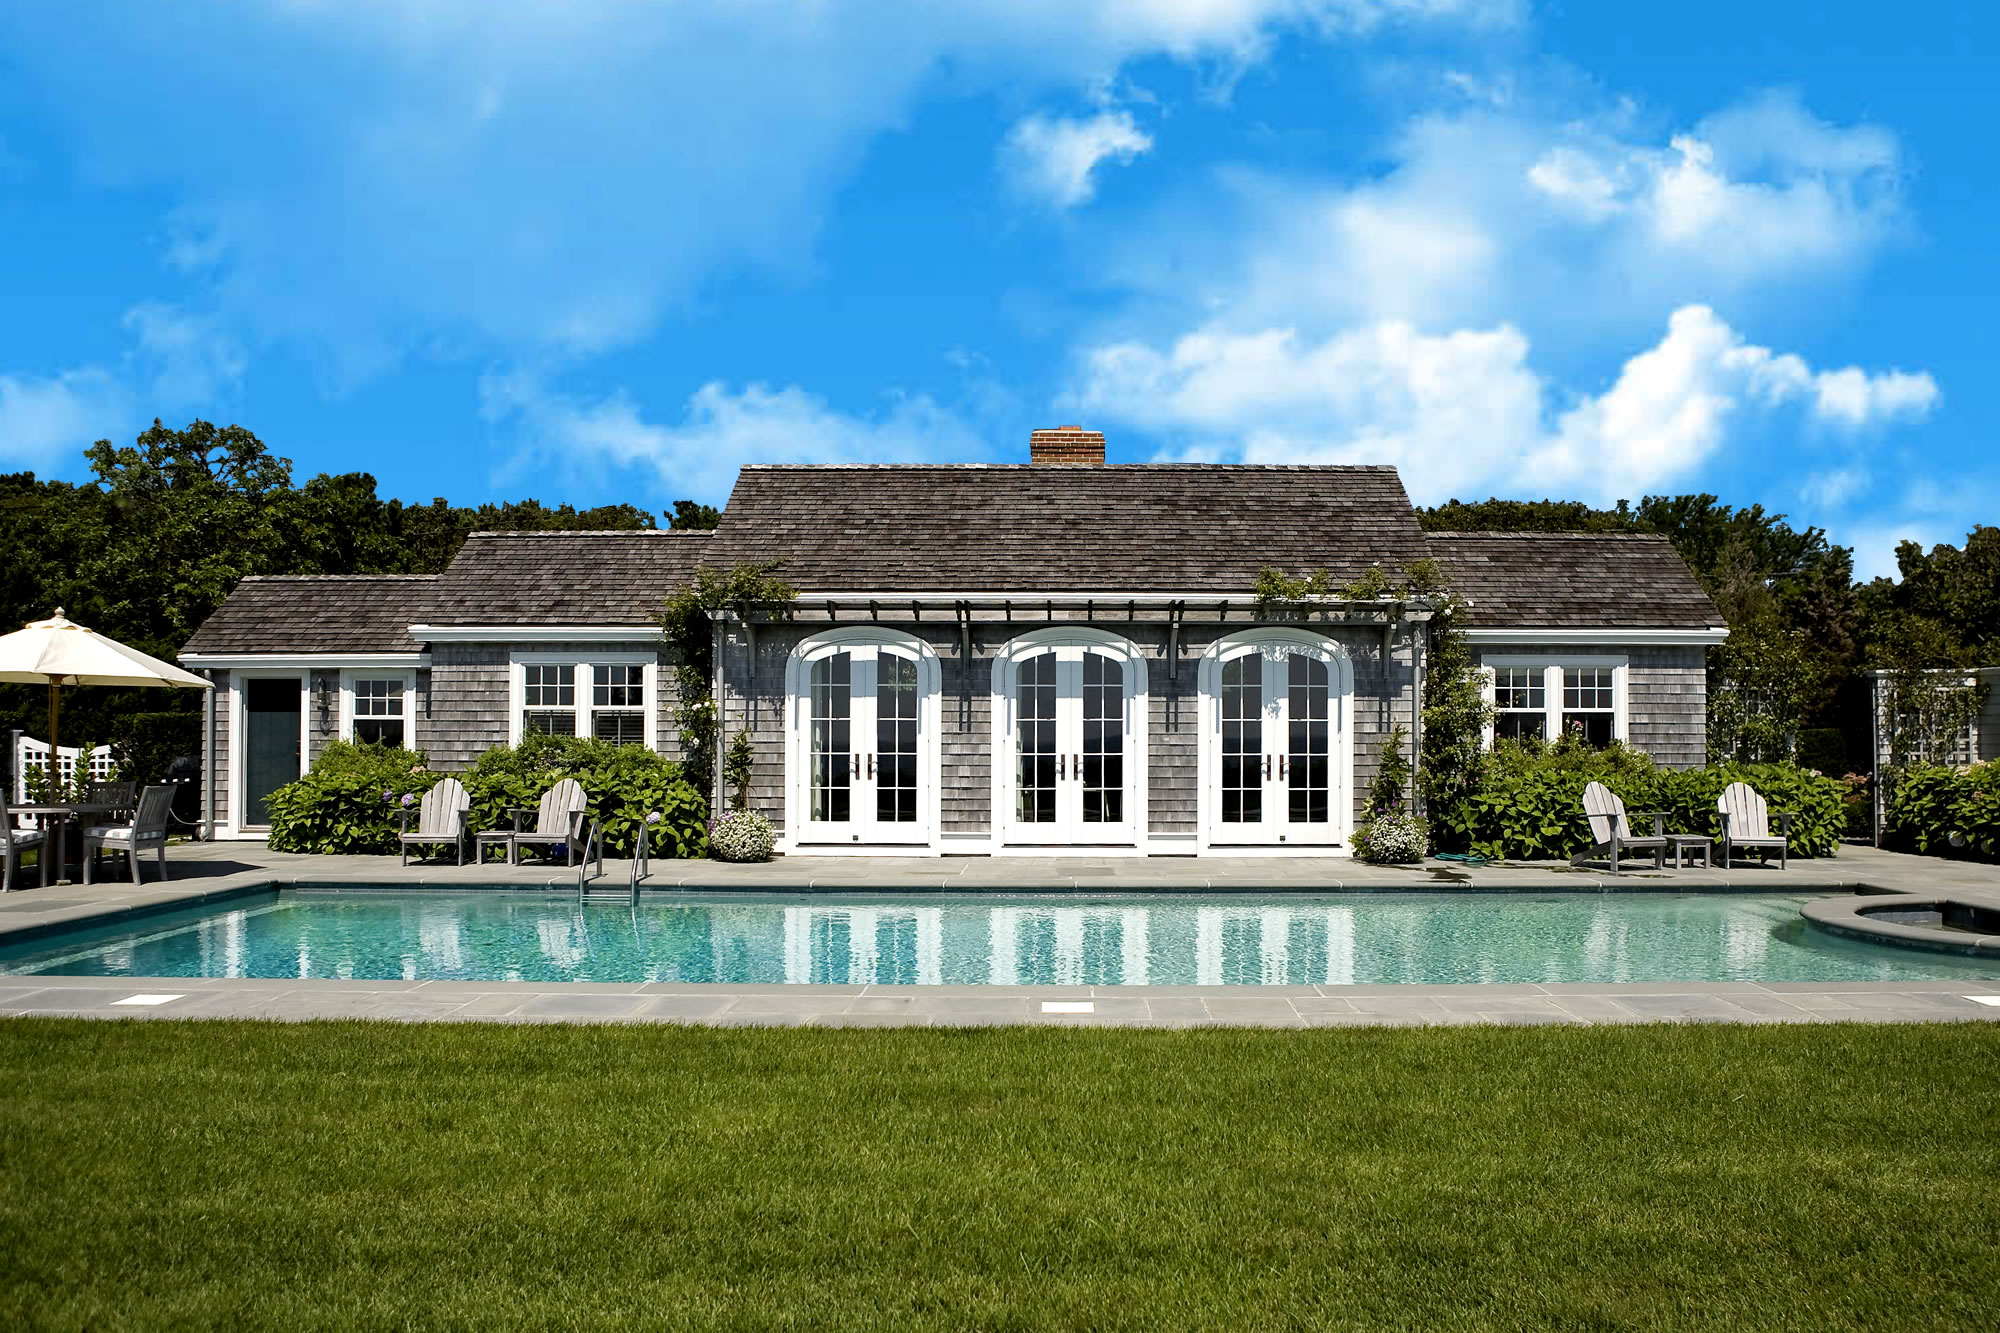 Rogers & Marney, Inc. has grown over the years to become one of Osterville's premier custom home builders, proudly offering complete construction services